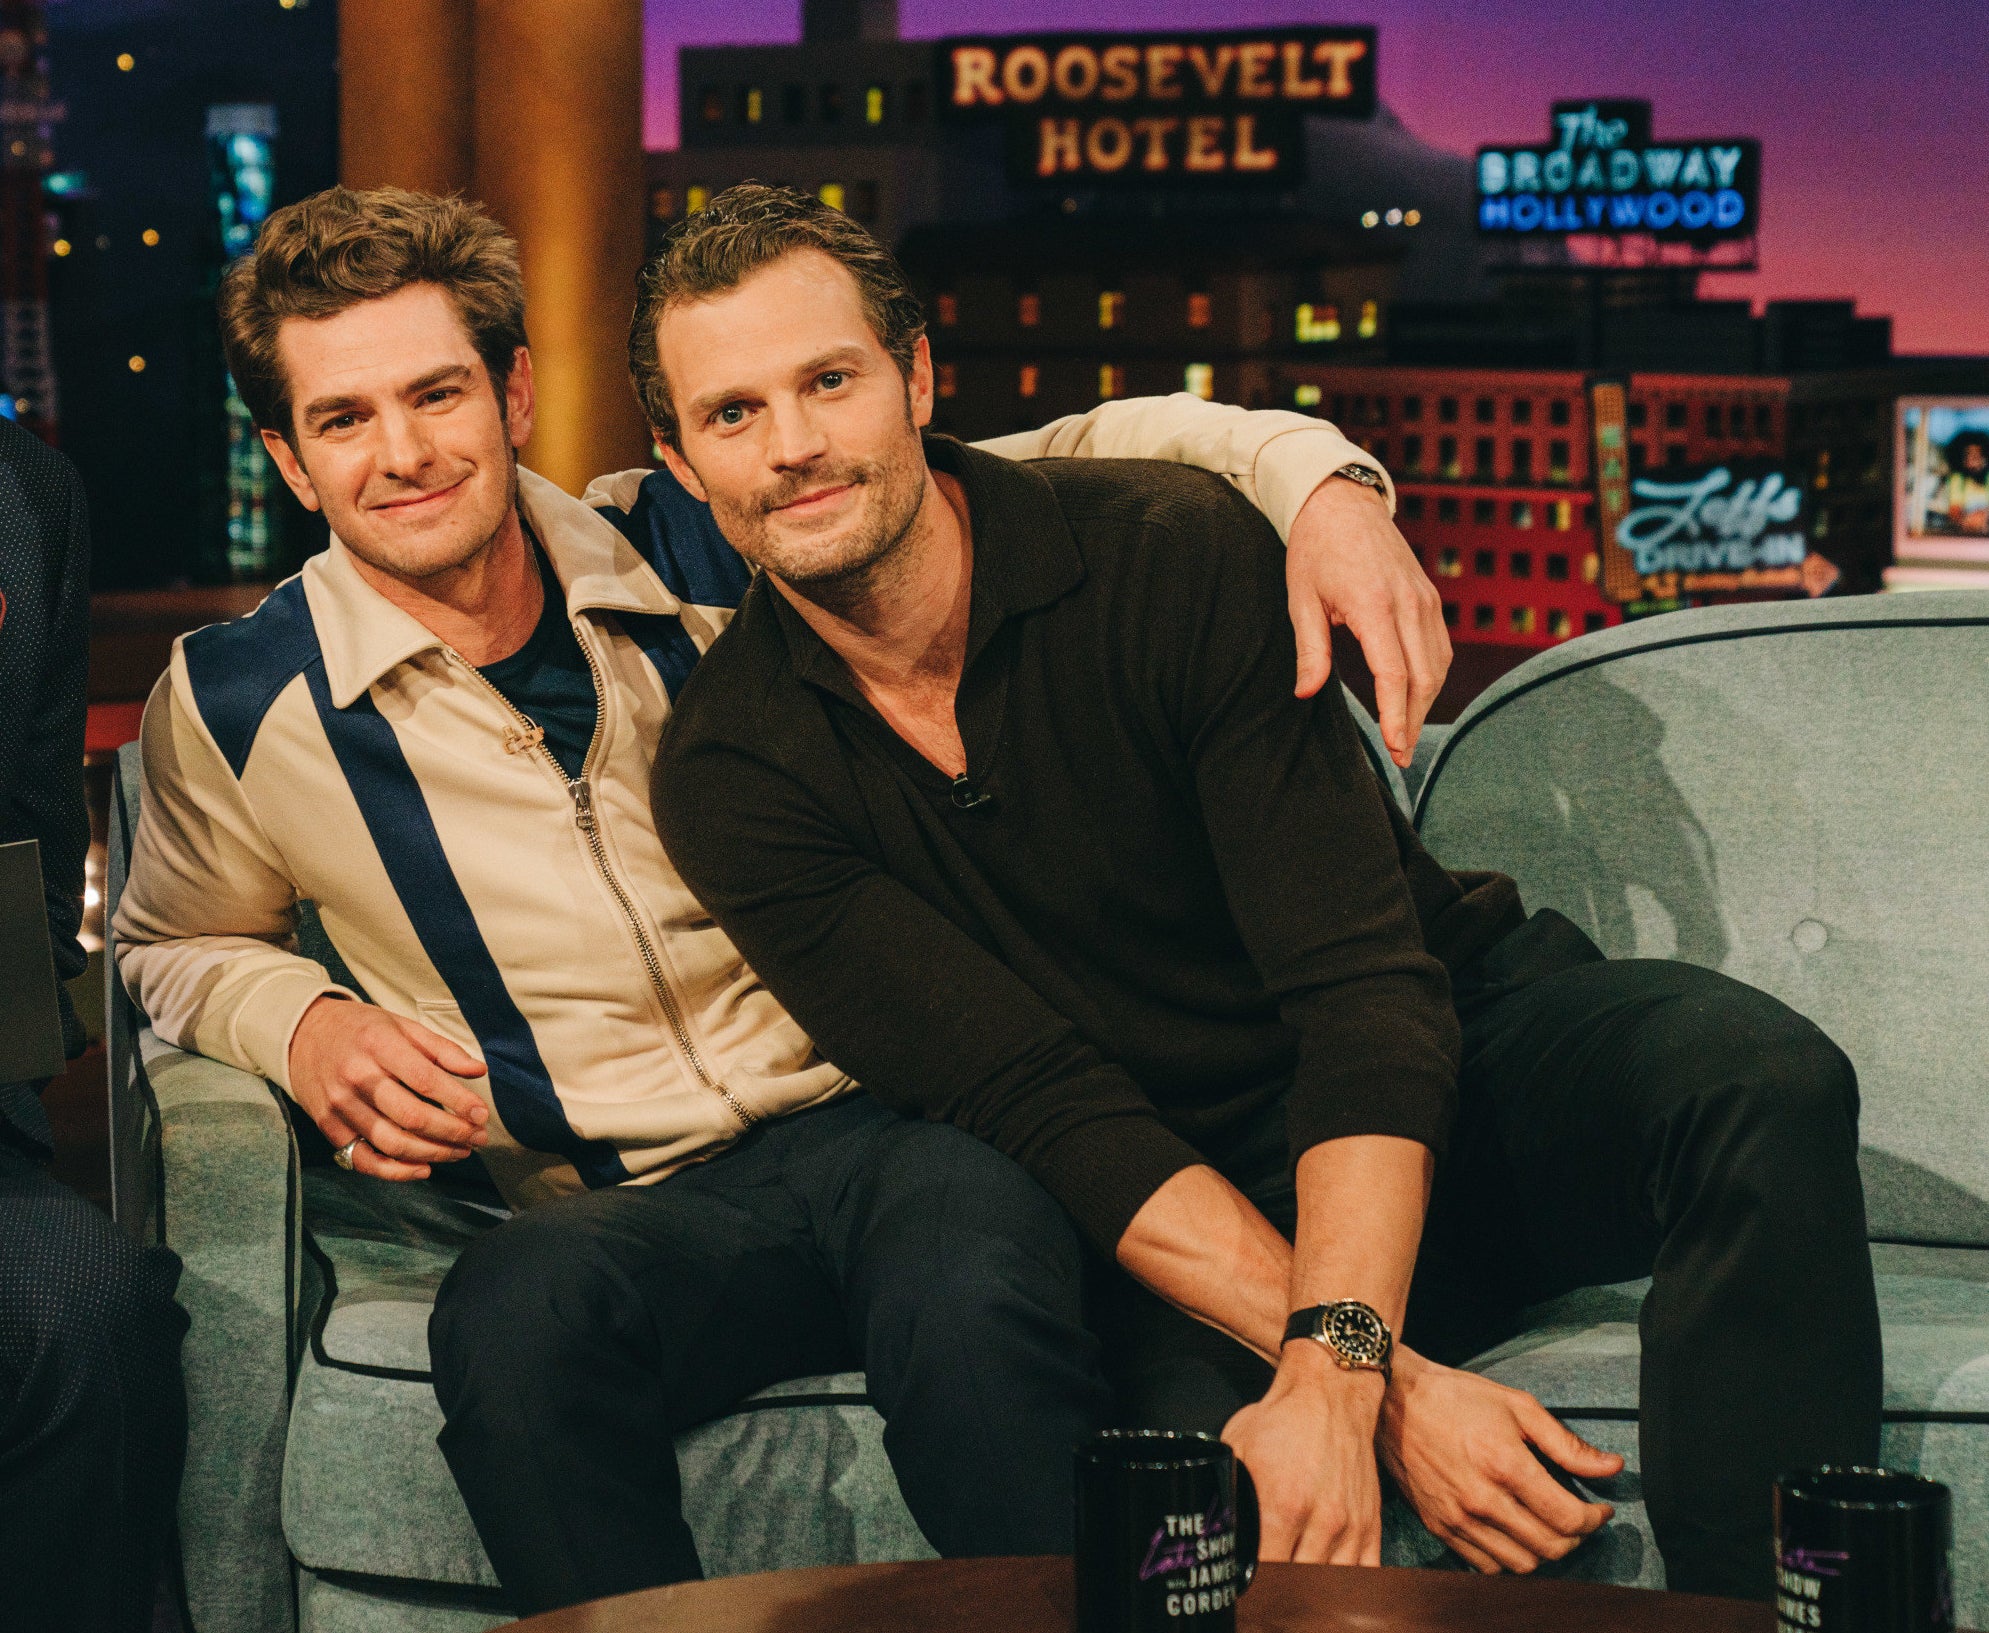 Jamie Dornan Admitted Robert Pattinson Didn't “Fit In” With Him And Andrew Garfield After He Claimed He Was Excluded By Them